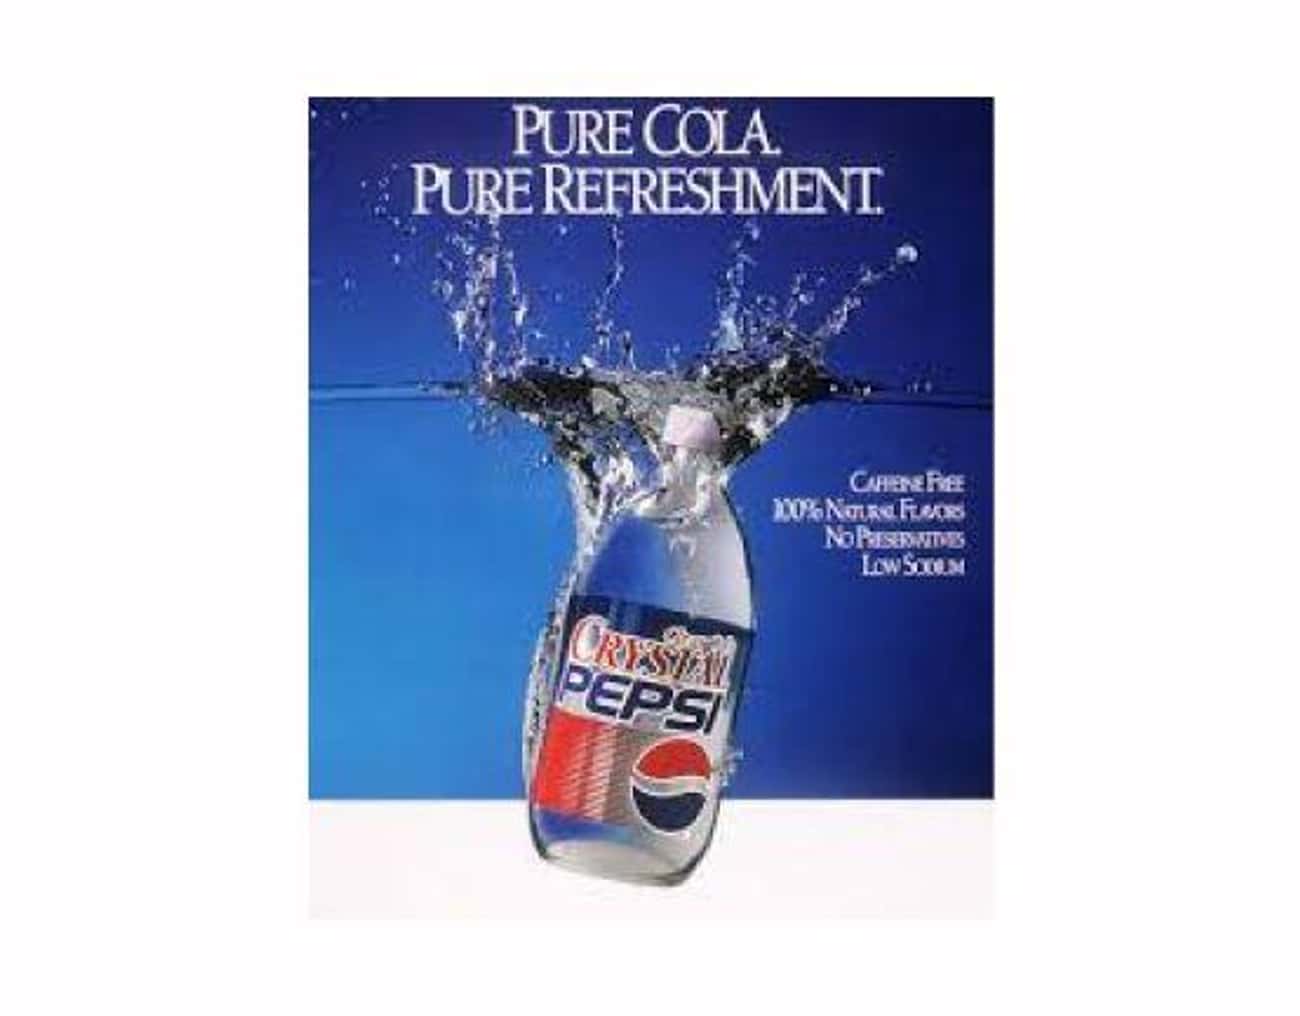 















Crystal Pepsi Was First Released In 1992, Launching A ‘Clear Cola’ Craze